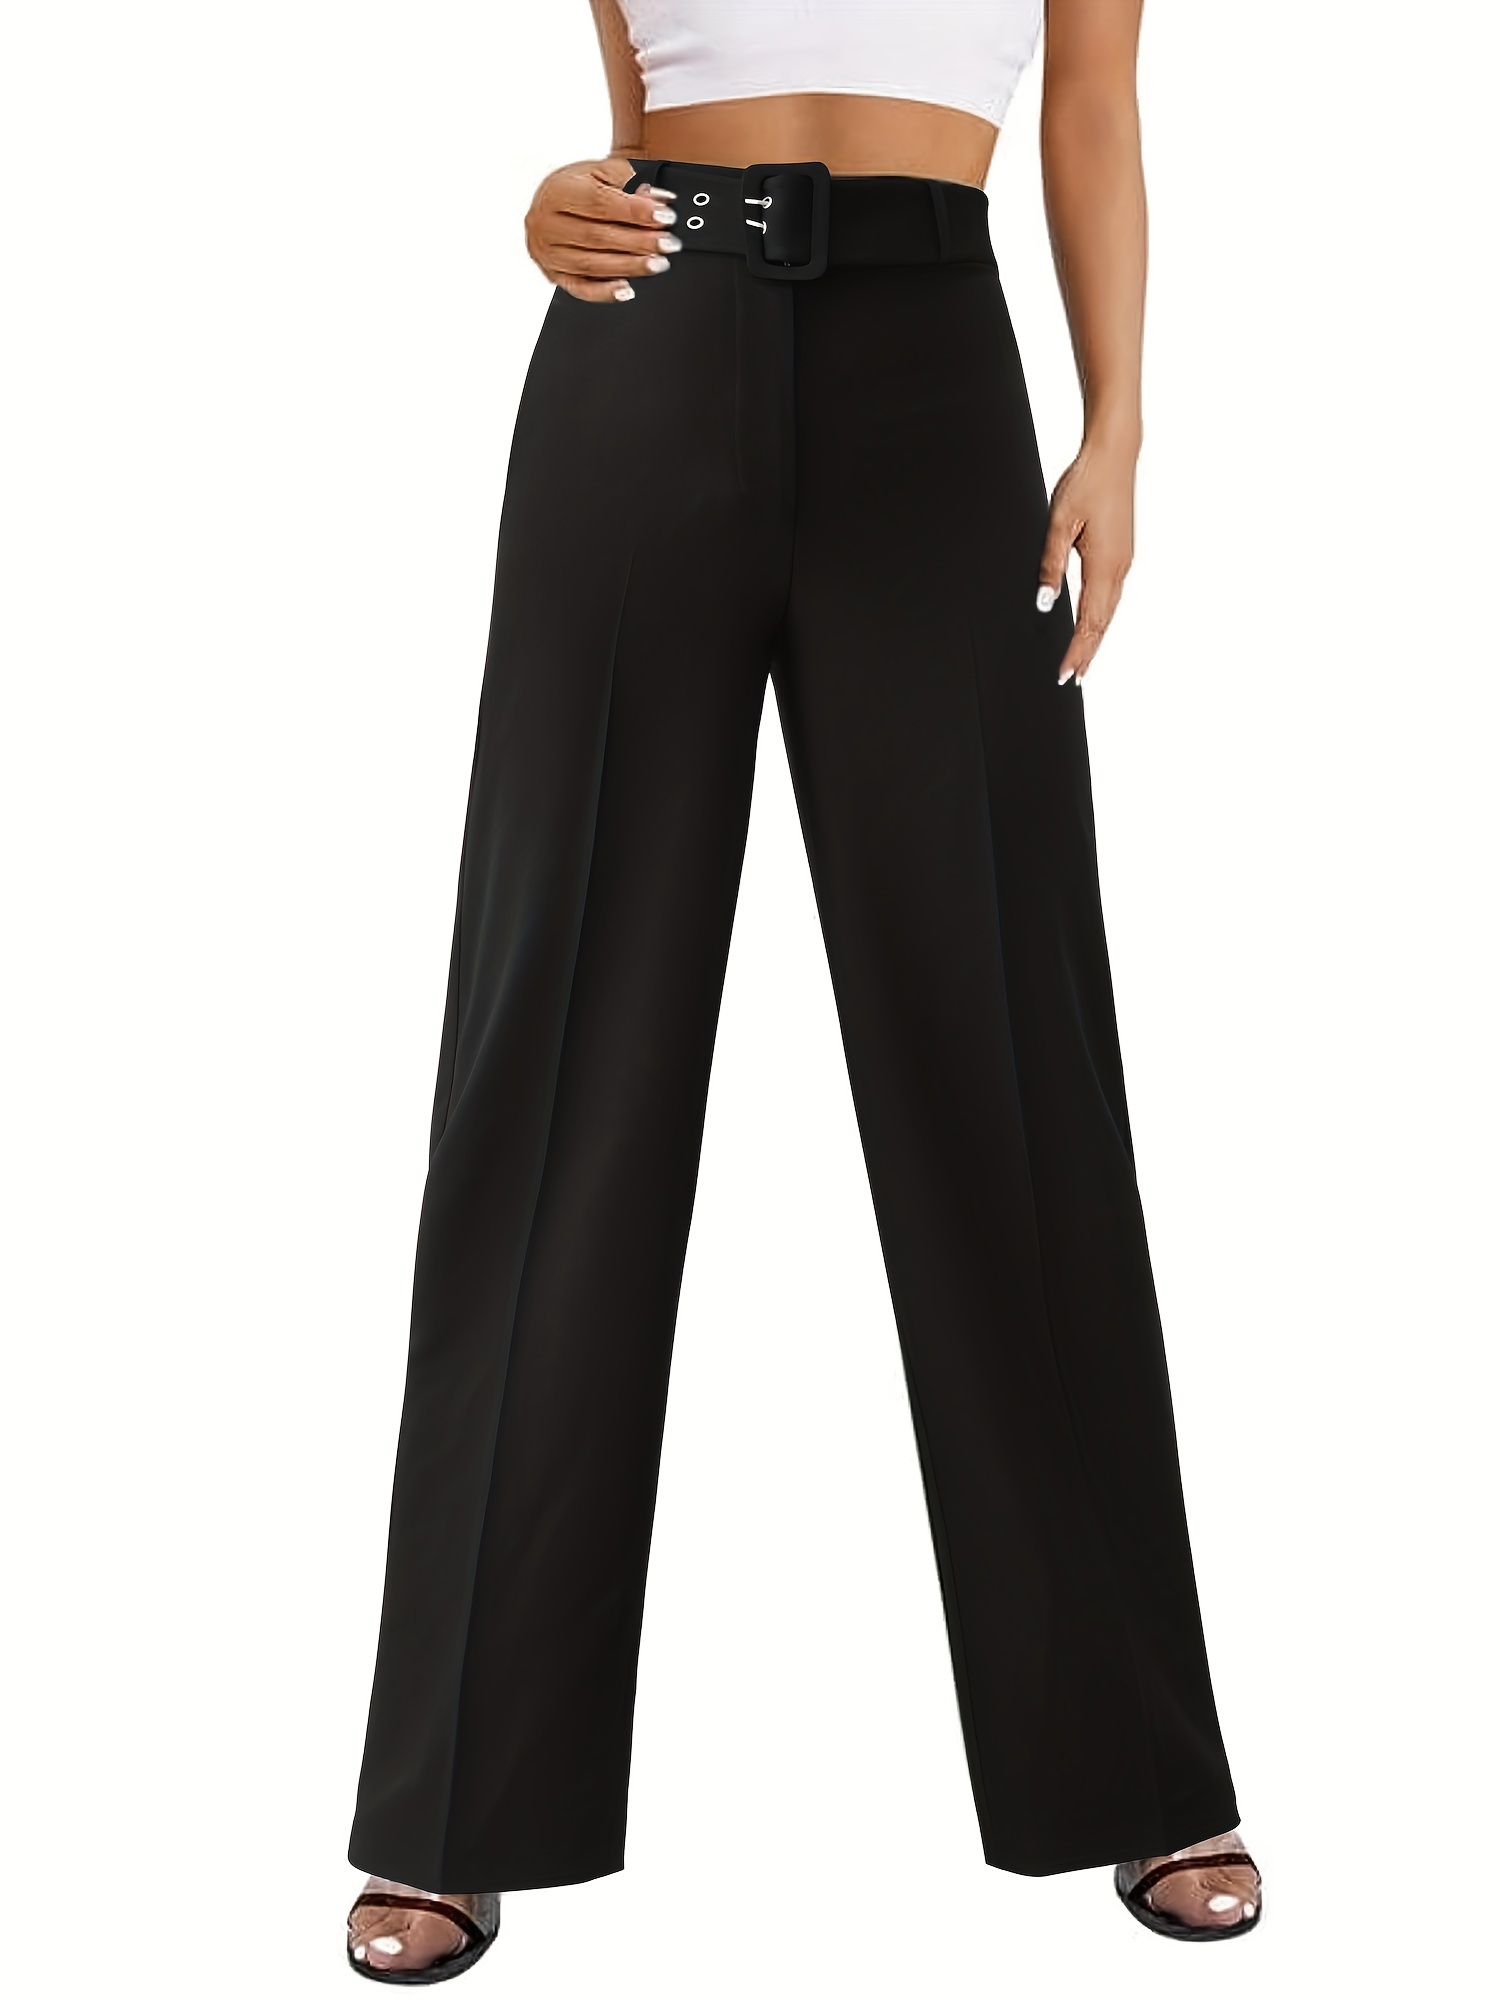 Straight Leg Pleated Trouser, High Waist Pants For Office, Every Day,  Women's Clothing